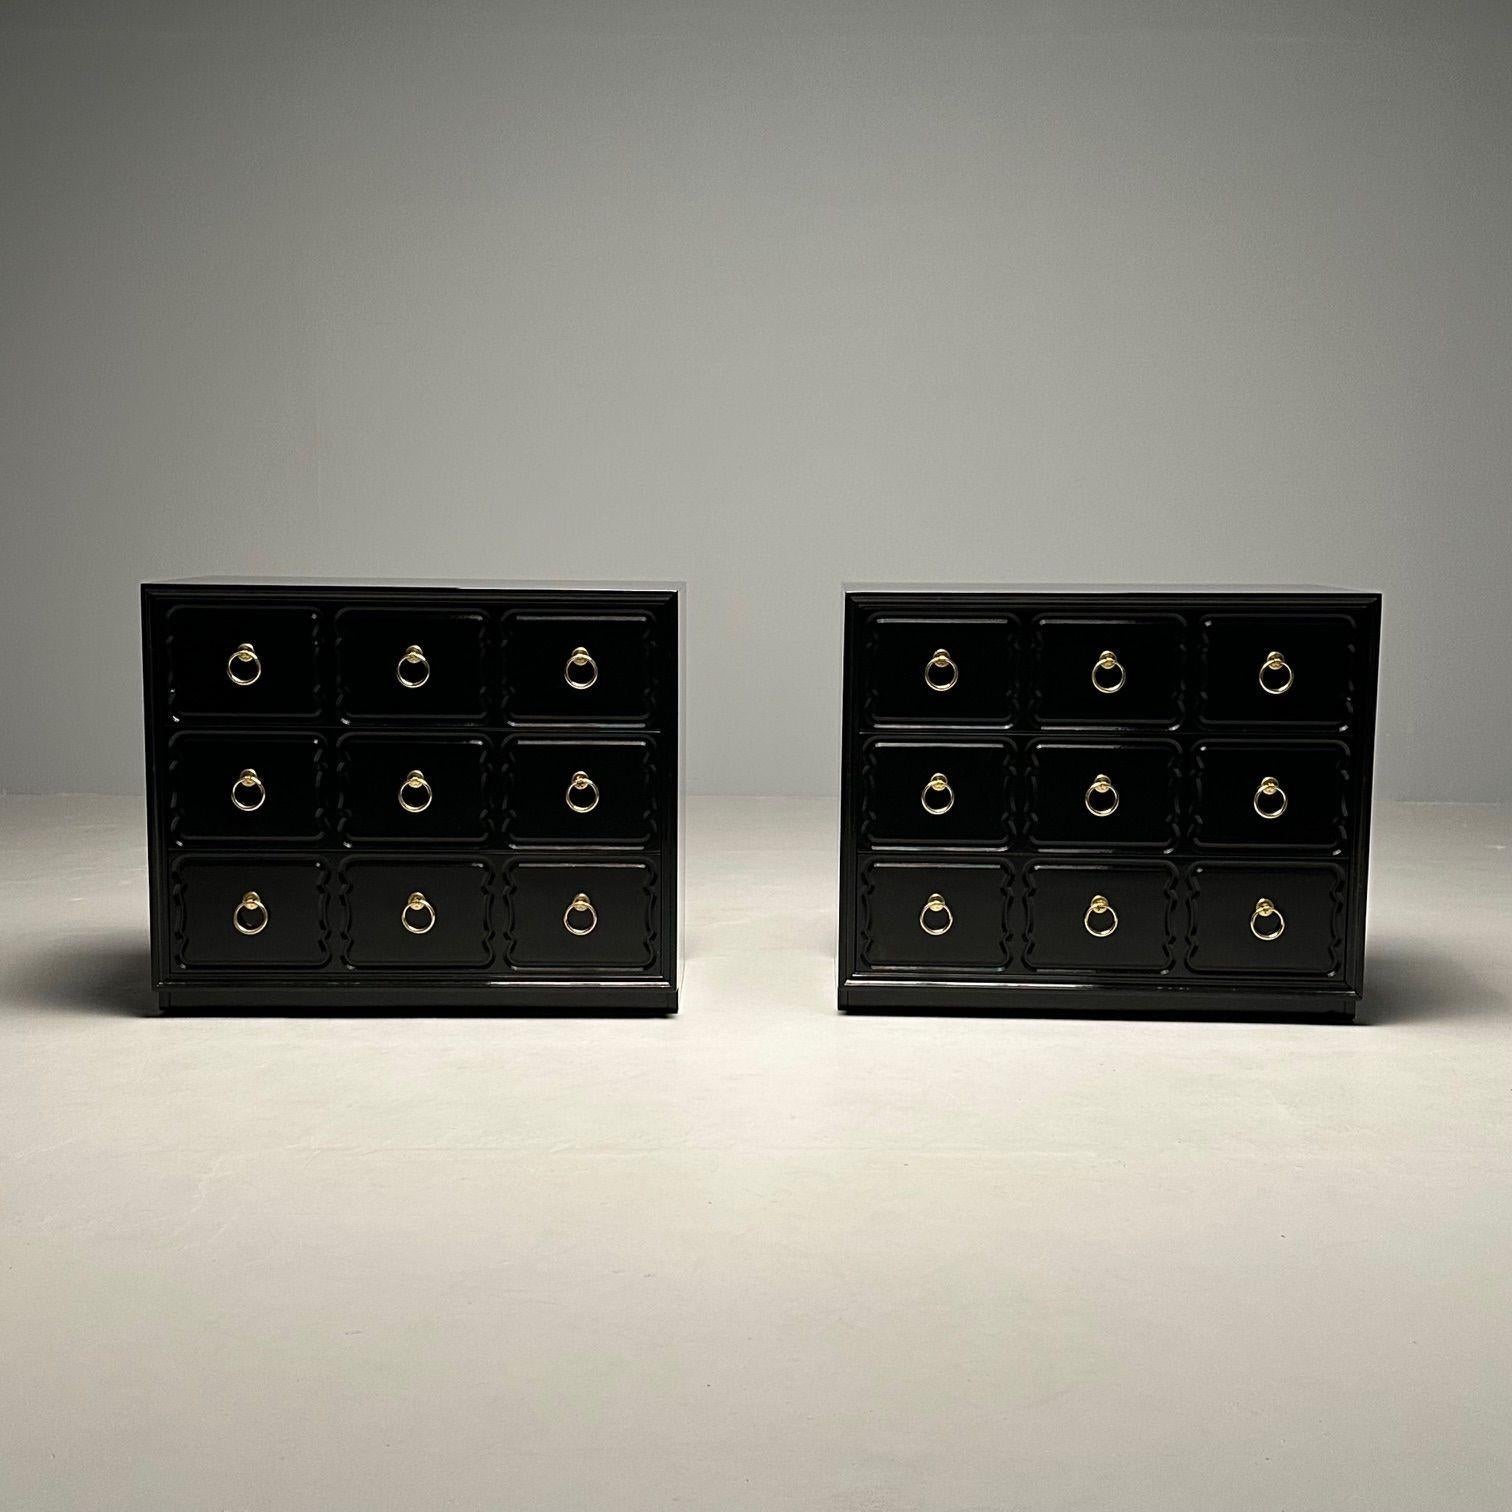 Pair of Heritage Espana Chests by Dorothy Draper, Stamped, Mid Century Modern

A pair of stunning fully refinished chests or nightstand tables by Heritage for Dorothy Draper in a fine ebony lacquered finished with brass circular pulls. Each having